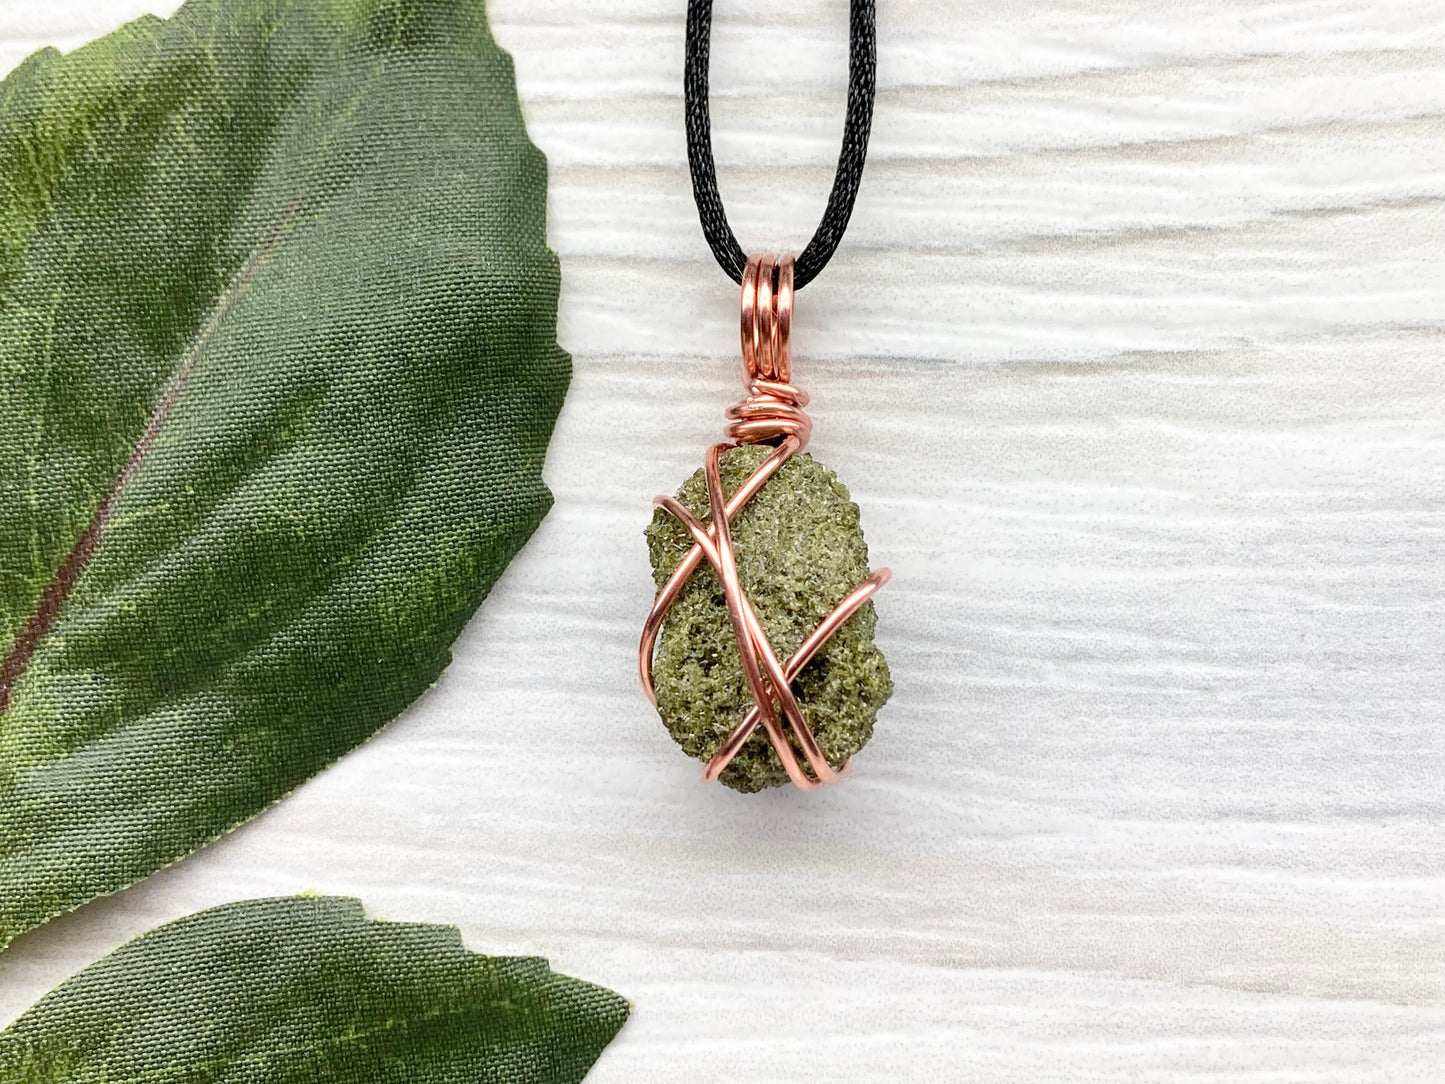 Raw Epidote Necklace. Copper Wire Wrapped Green Crystal Pendant. Comes On A Black Necklace. Handmade Spiritual Jewelry.